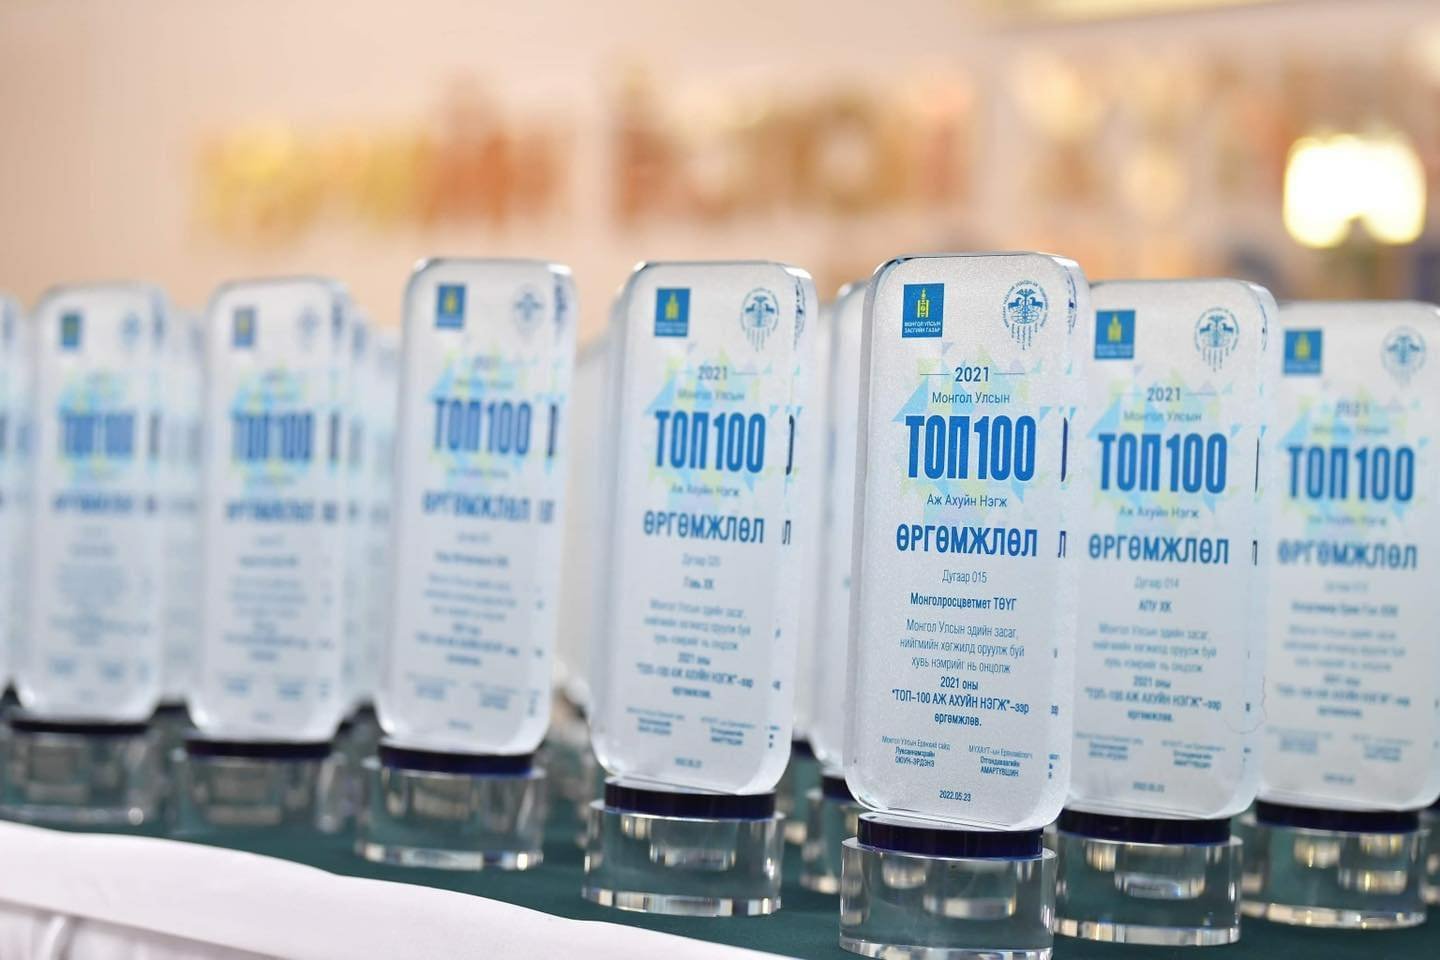 WE ARE RECOGNIZED AS ONE OF THE TOP 100 ENTERPRISES OF MONGOLIA